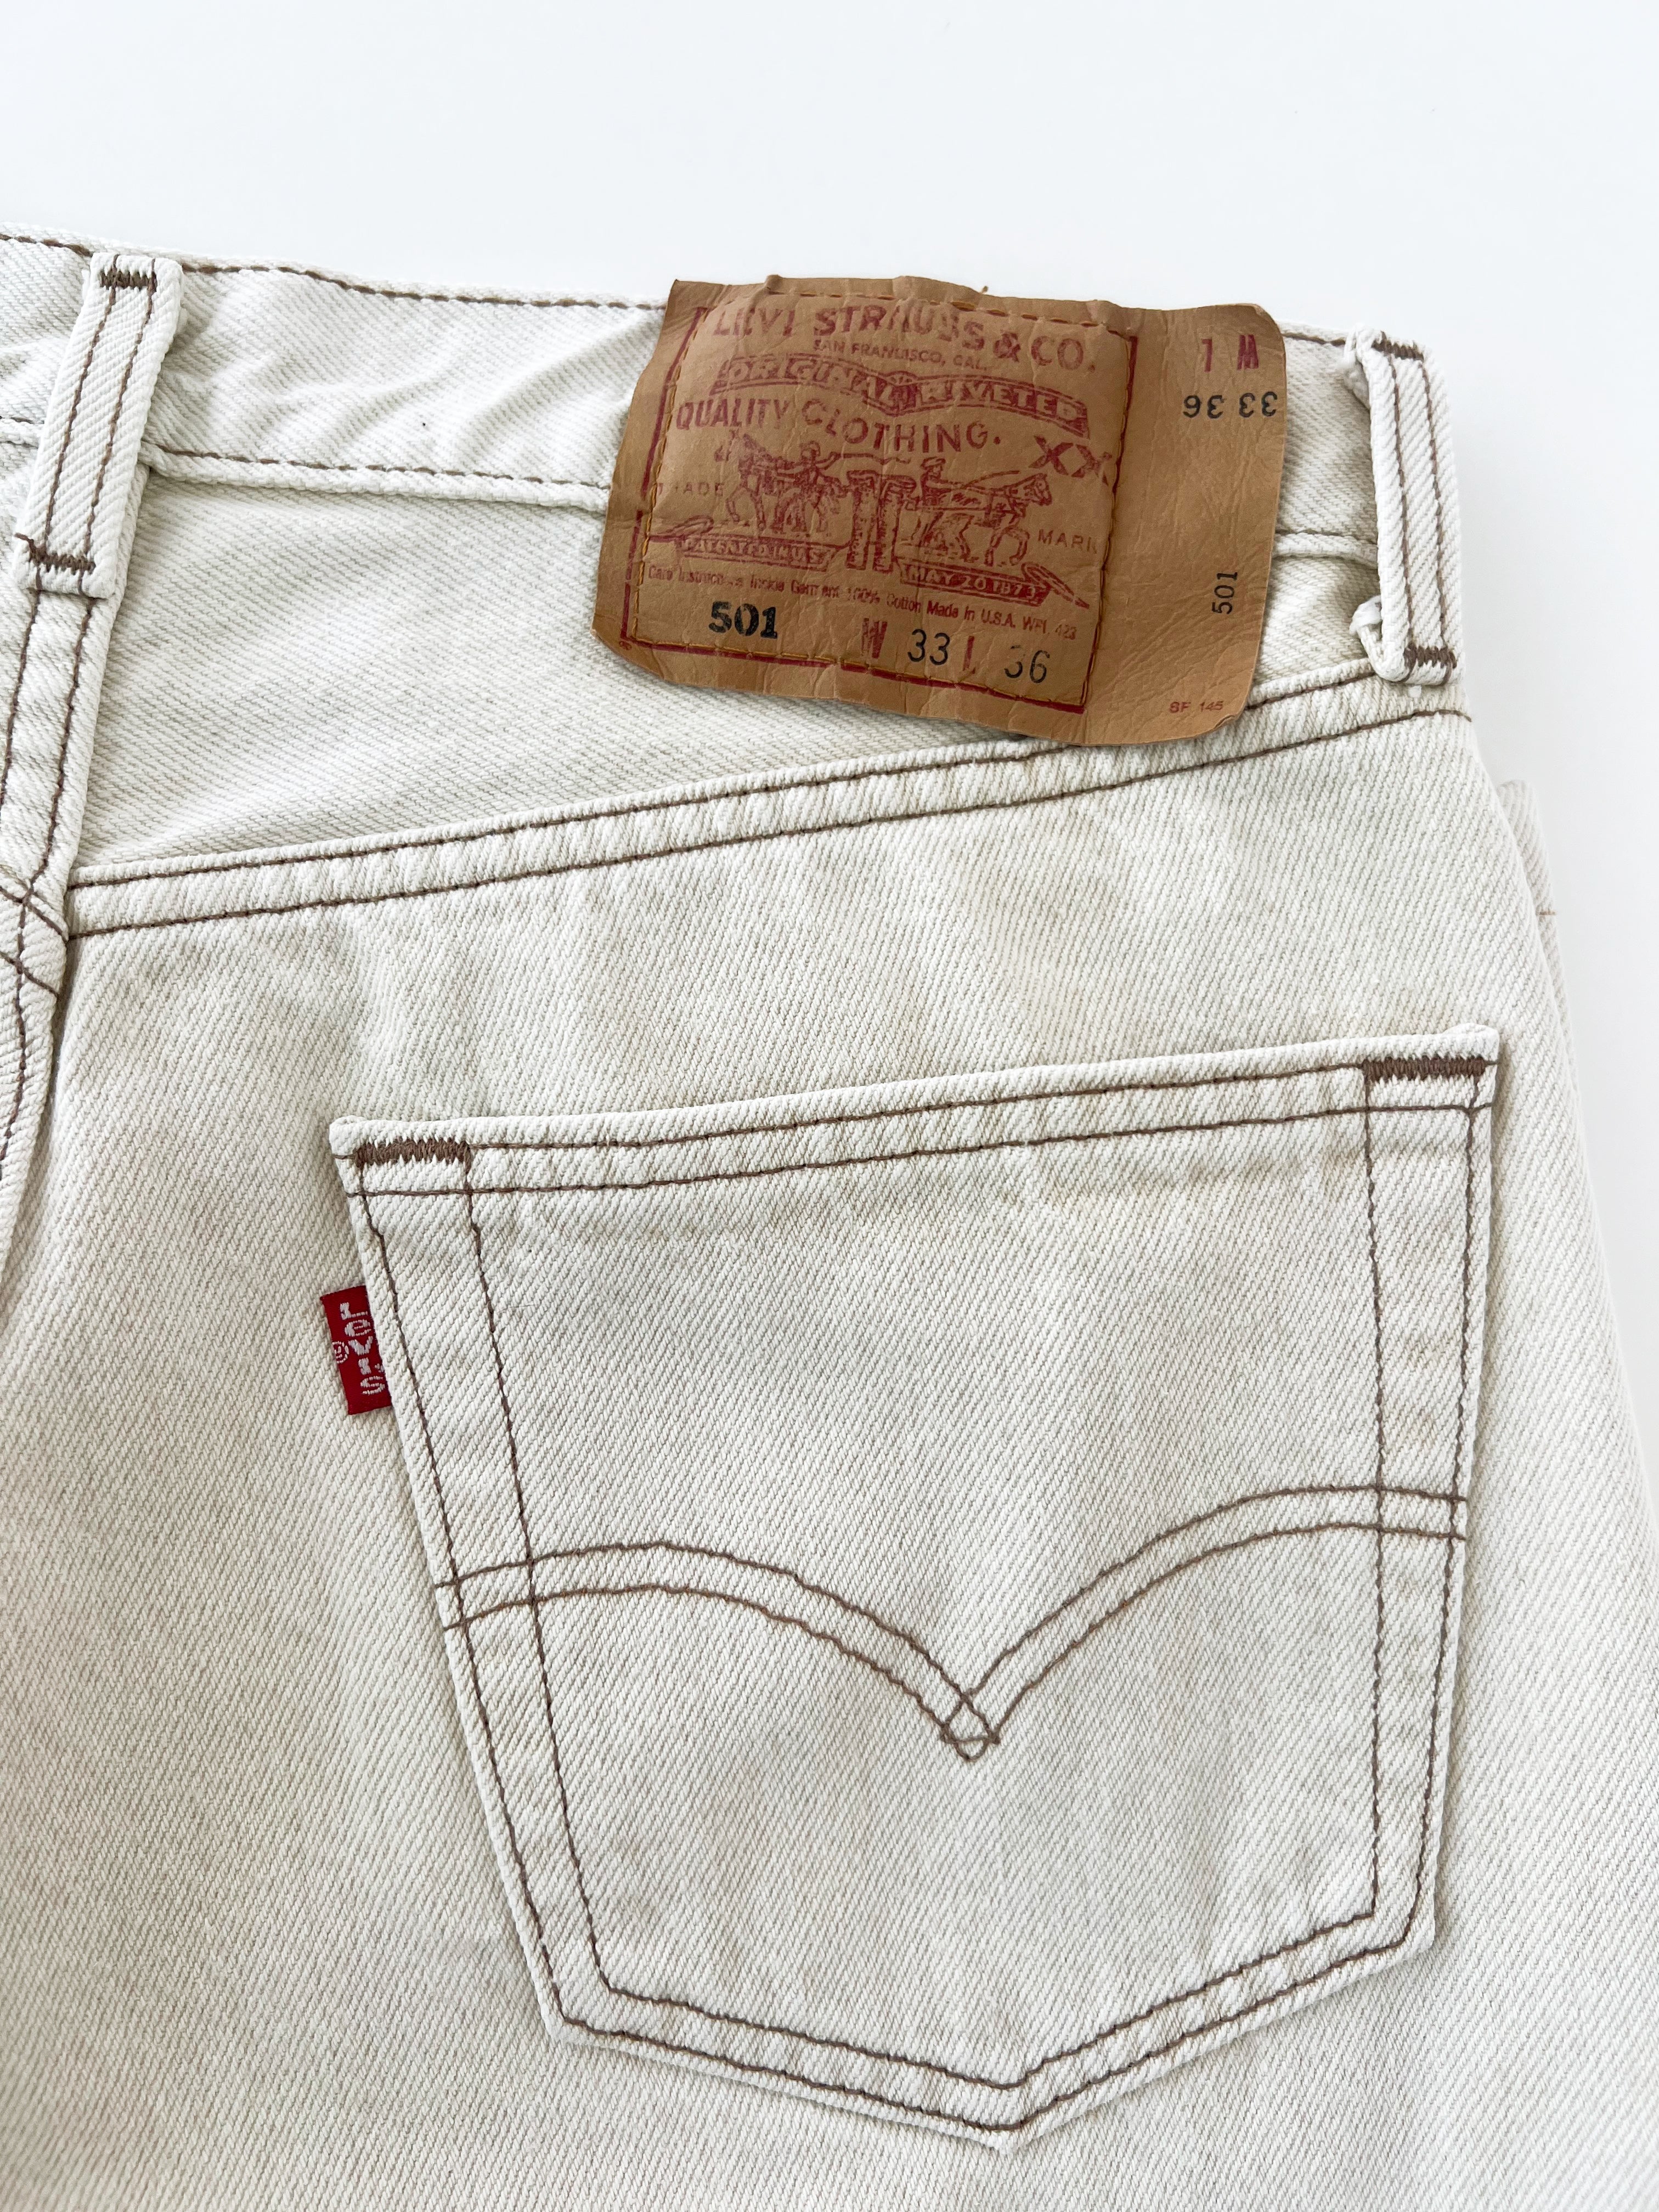 Vintage Levi's 501 Jeans / W33 L36 / Made in USA – Preclothed